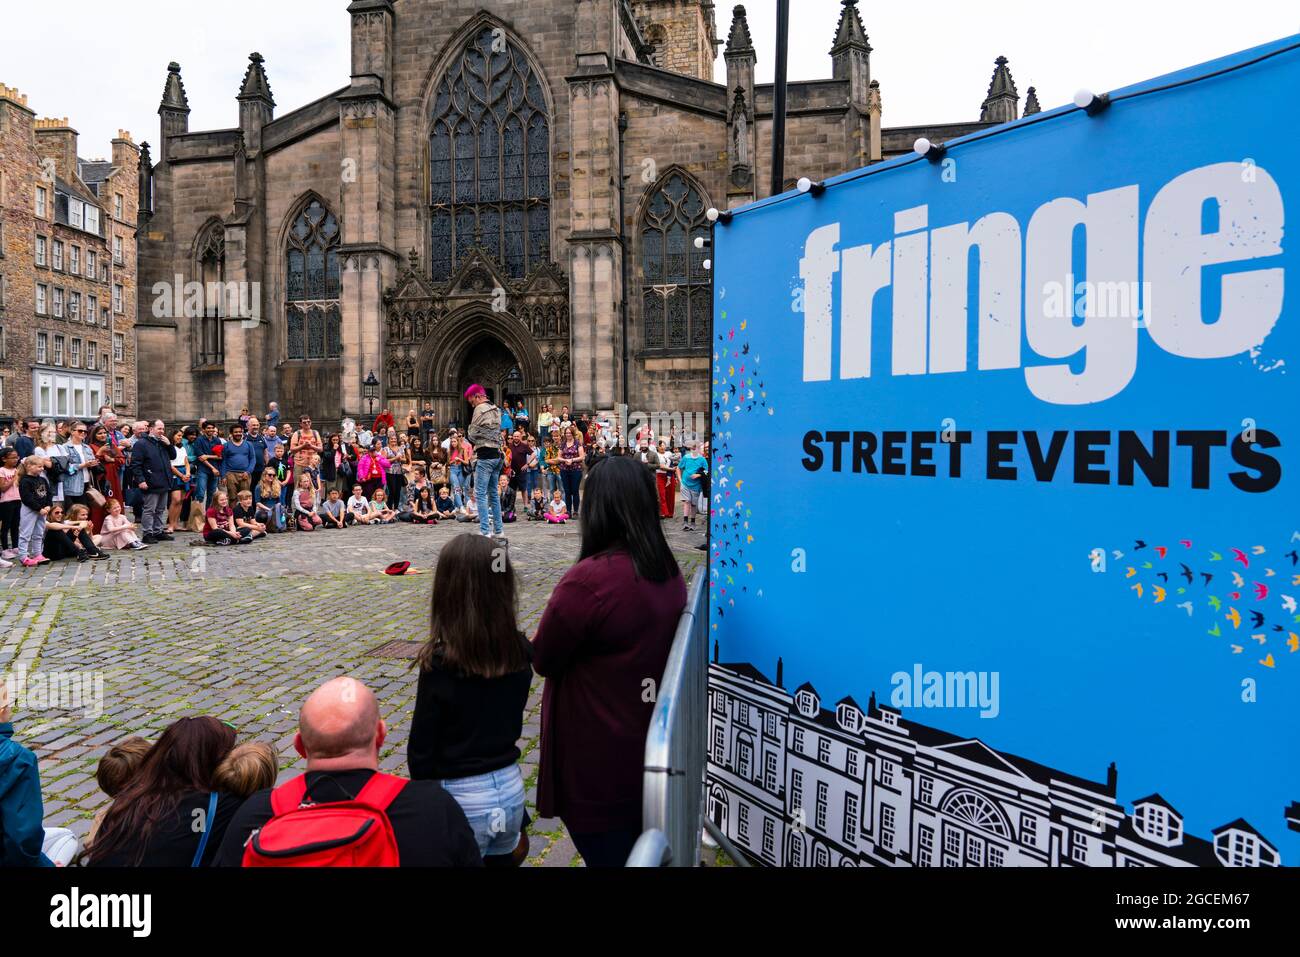 Edinburgh, Scotland, UK. 8th August  2021. On a sunny Sunday afternoon the Royal Mile was busy with visitors looking for the limited street entertainment provided during the much scaled back Edinburgh Fringe Festival this year. Two stages are provided for performers and these proved popular throughout the day. Pic; Crowd watches performer on Parliament Square in front of St Giles Cathedral. . Iain Masterton/Alamy Live news. Stock Photo